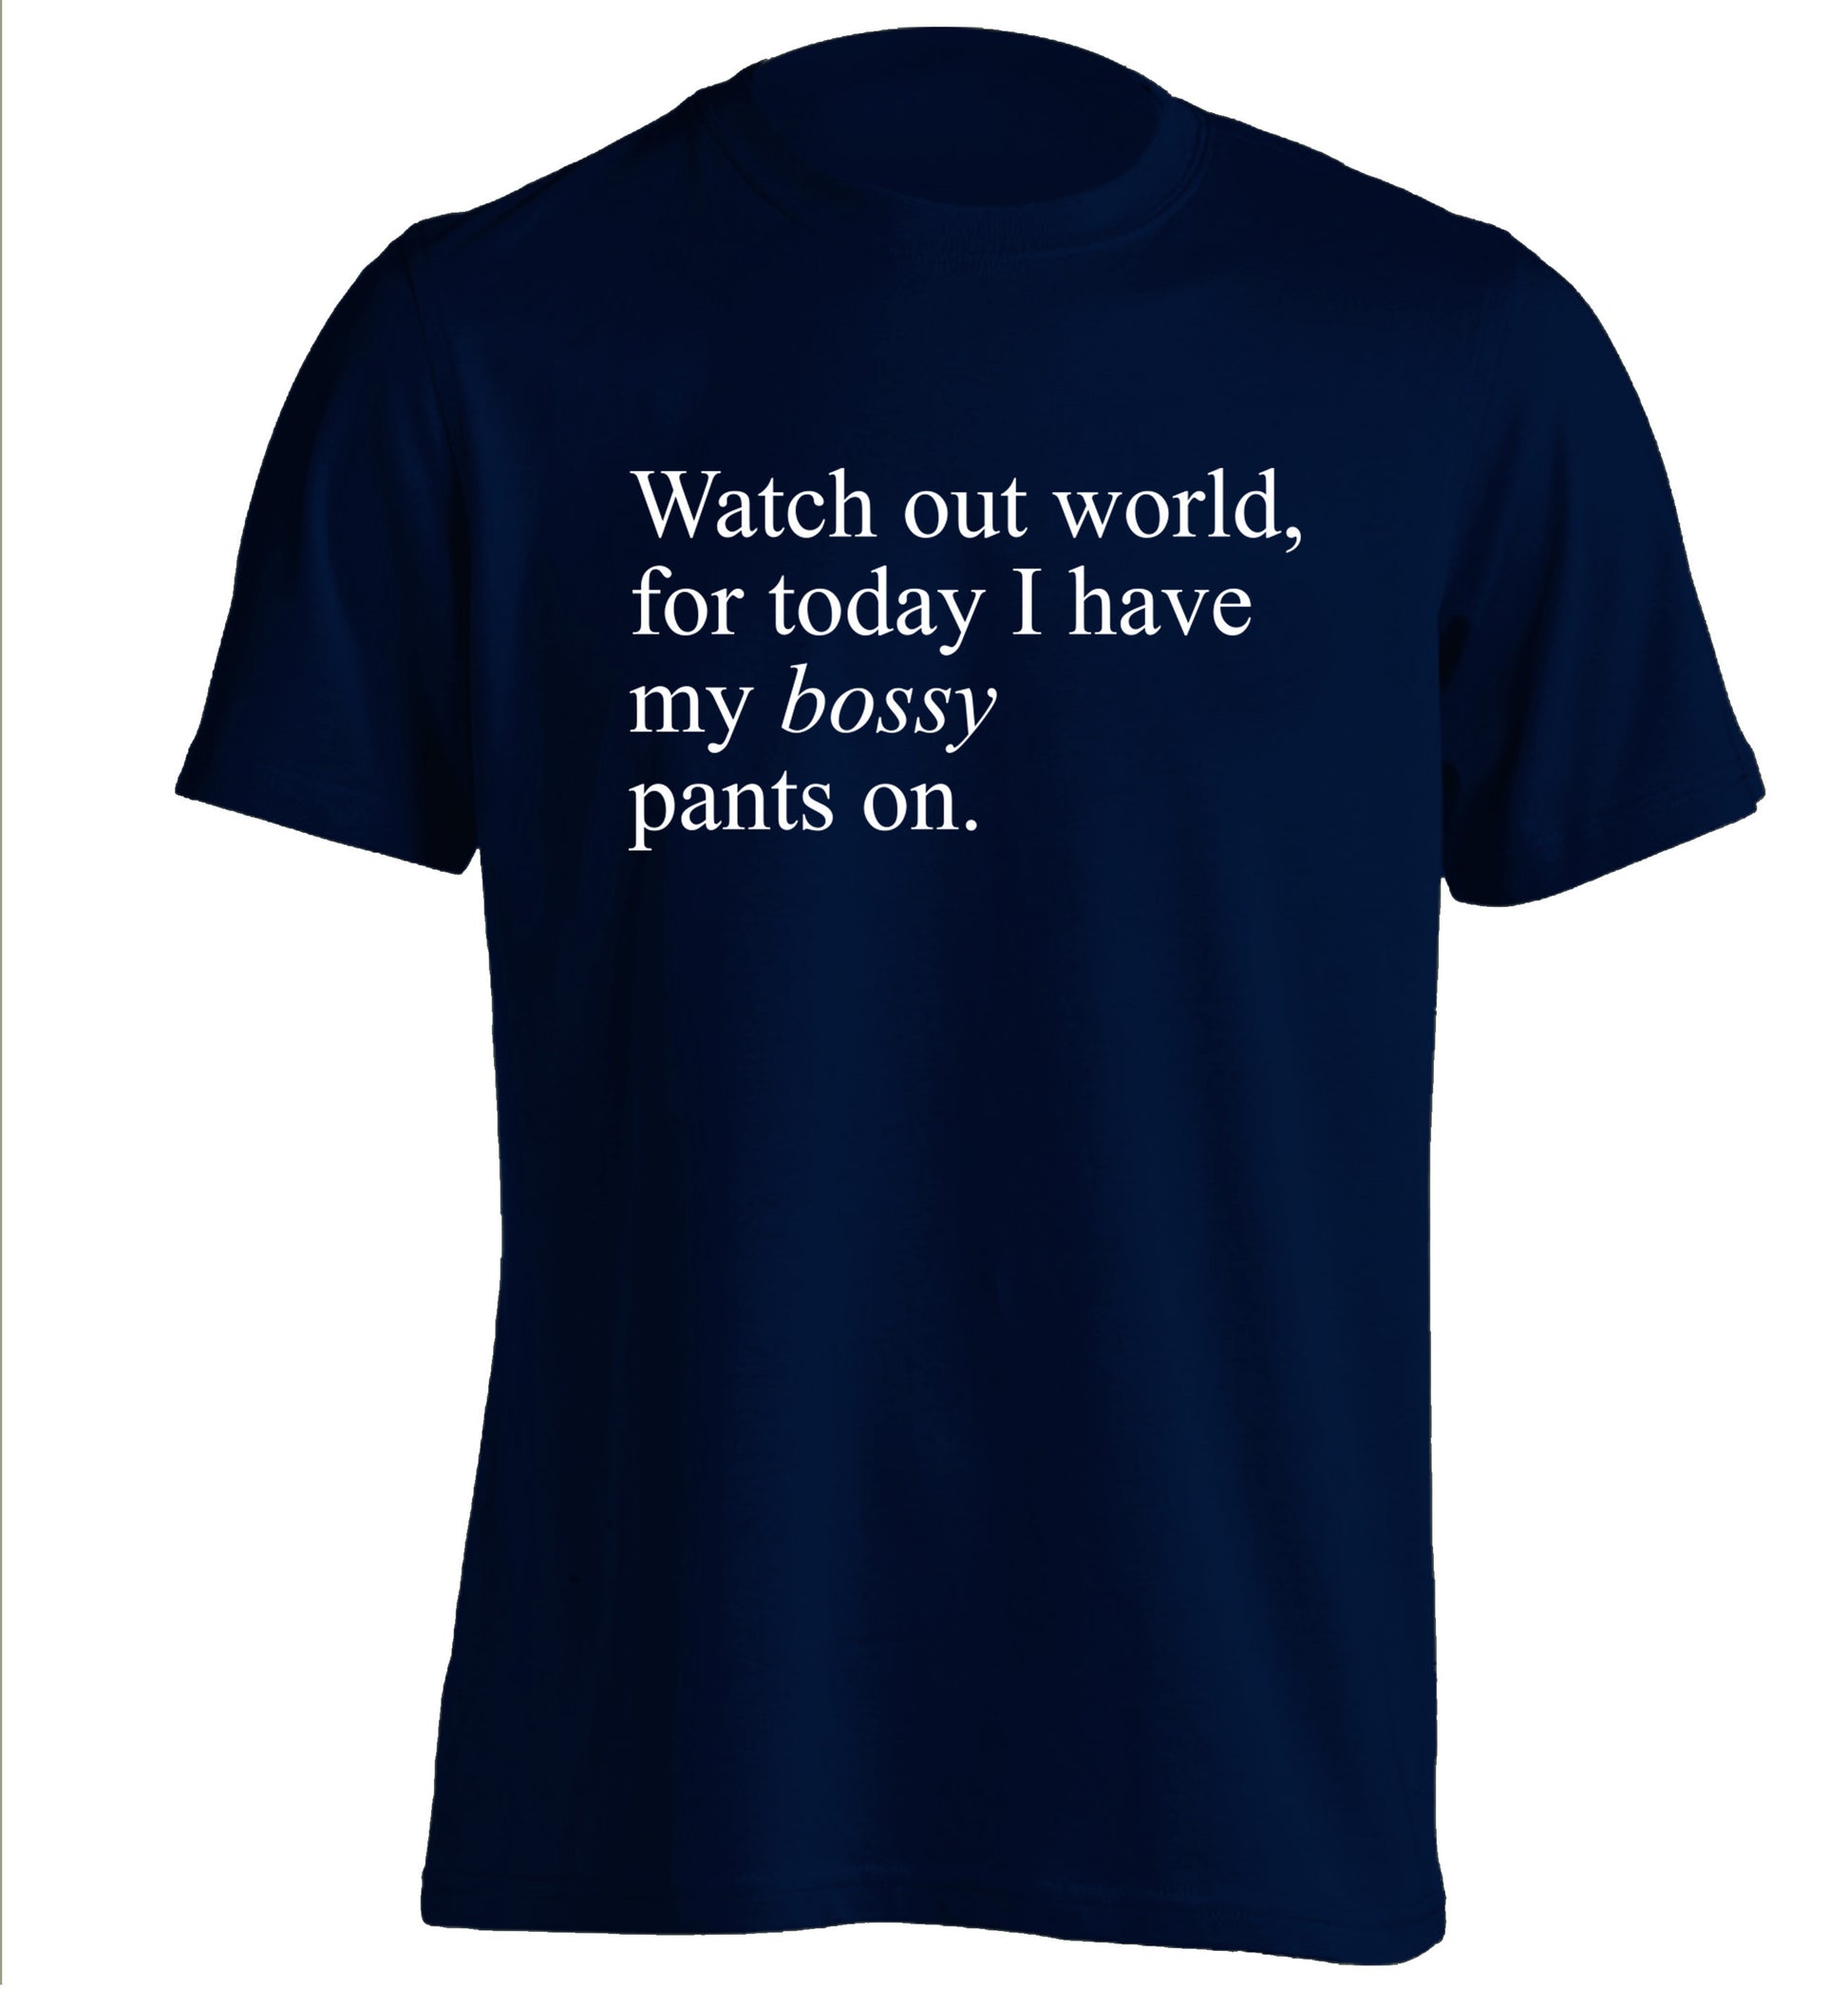 Watch out world, for today I have my bossy pants on adults unisex navy Tshirt 2XL